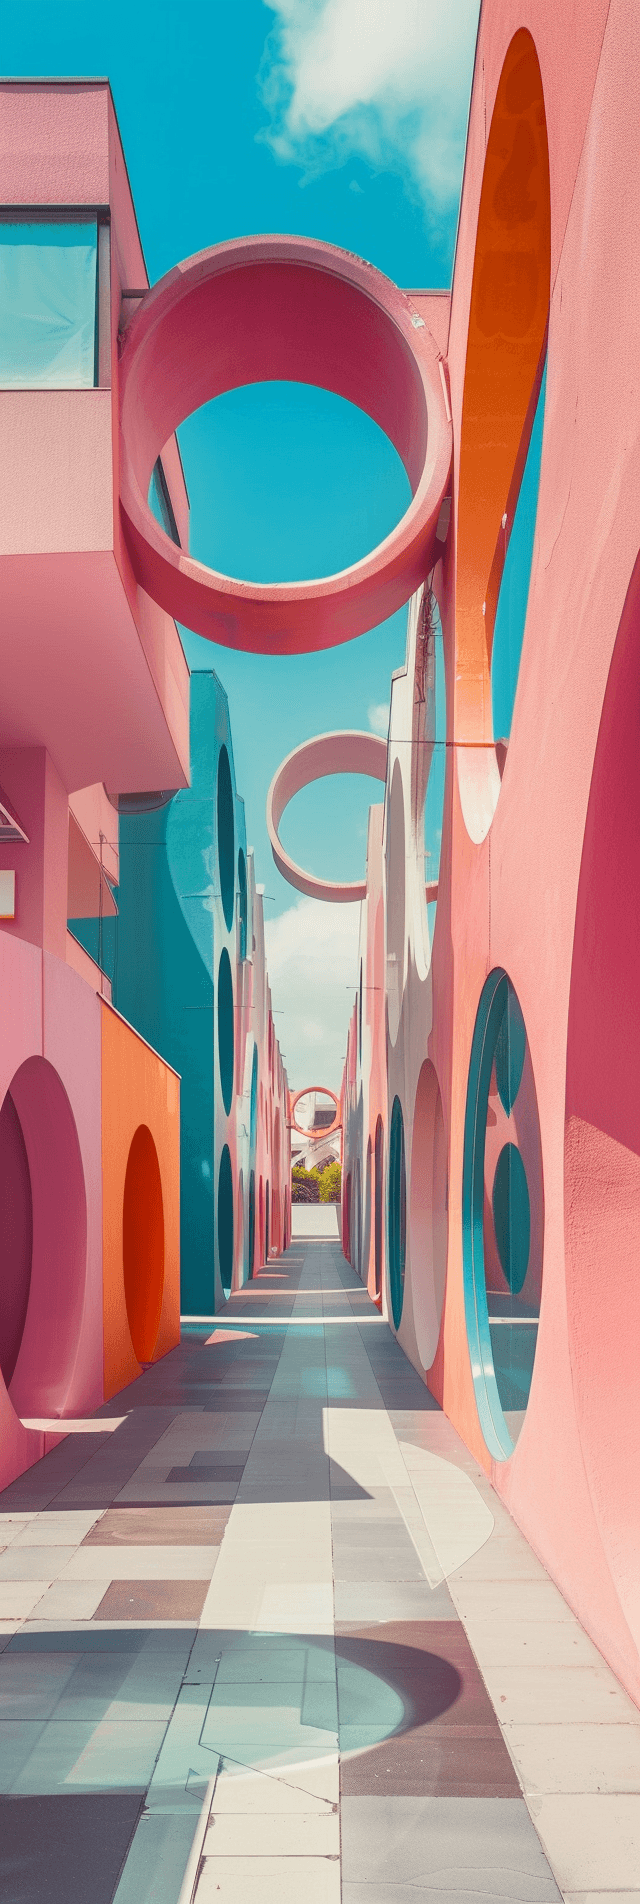 Ethereal Pastel Architecture [745BFE86-3C83-4994-9E49-59A833B70F45]